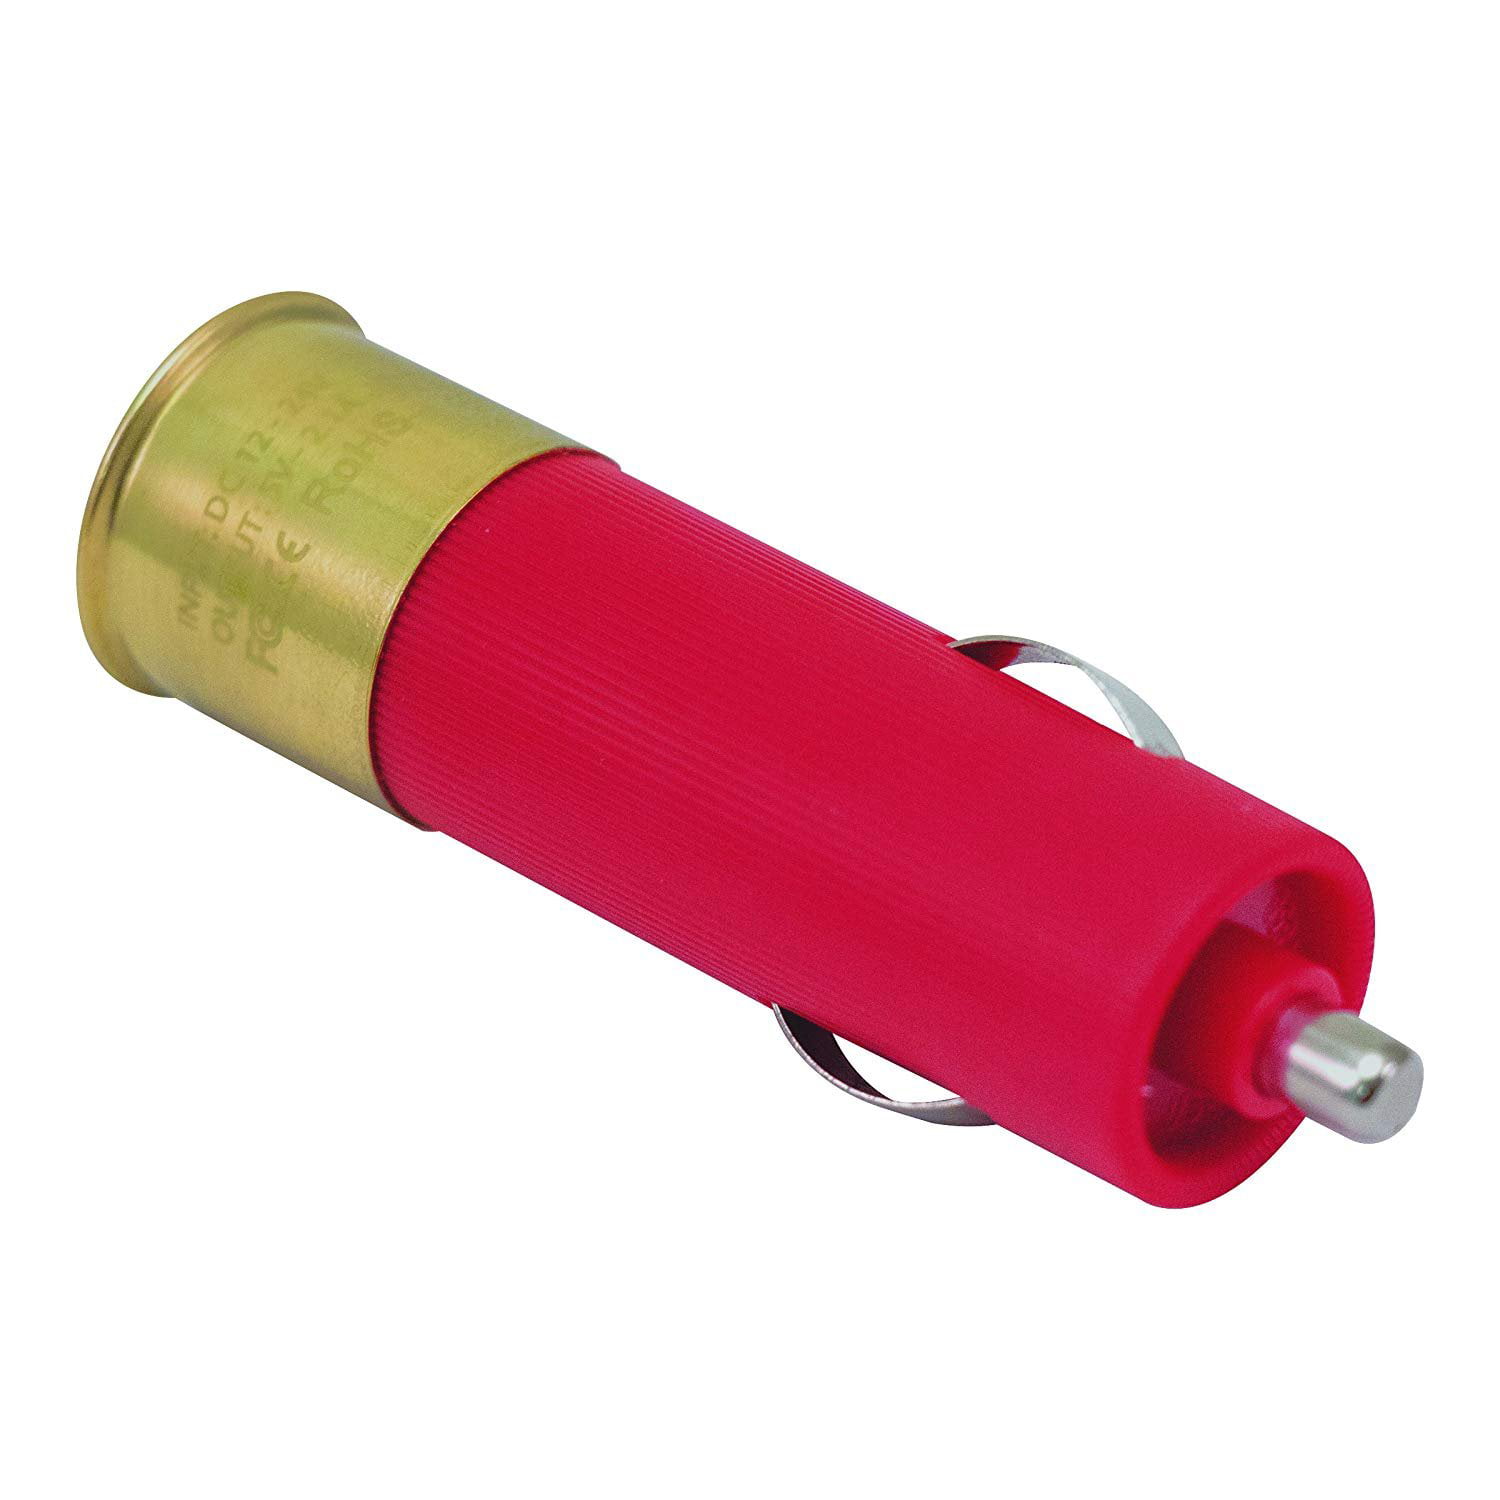 Red//Gold Advantus PWS51000-D 12 Gauge PowerShell USB Power Charger for Smartphones /& Tablets